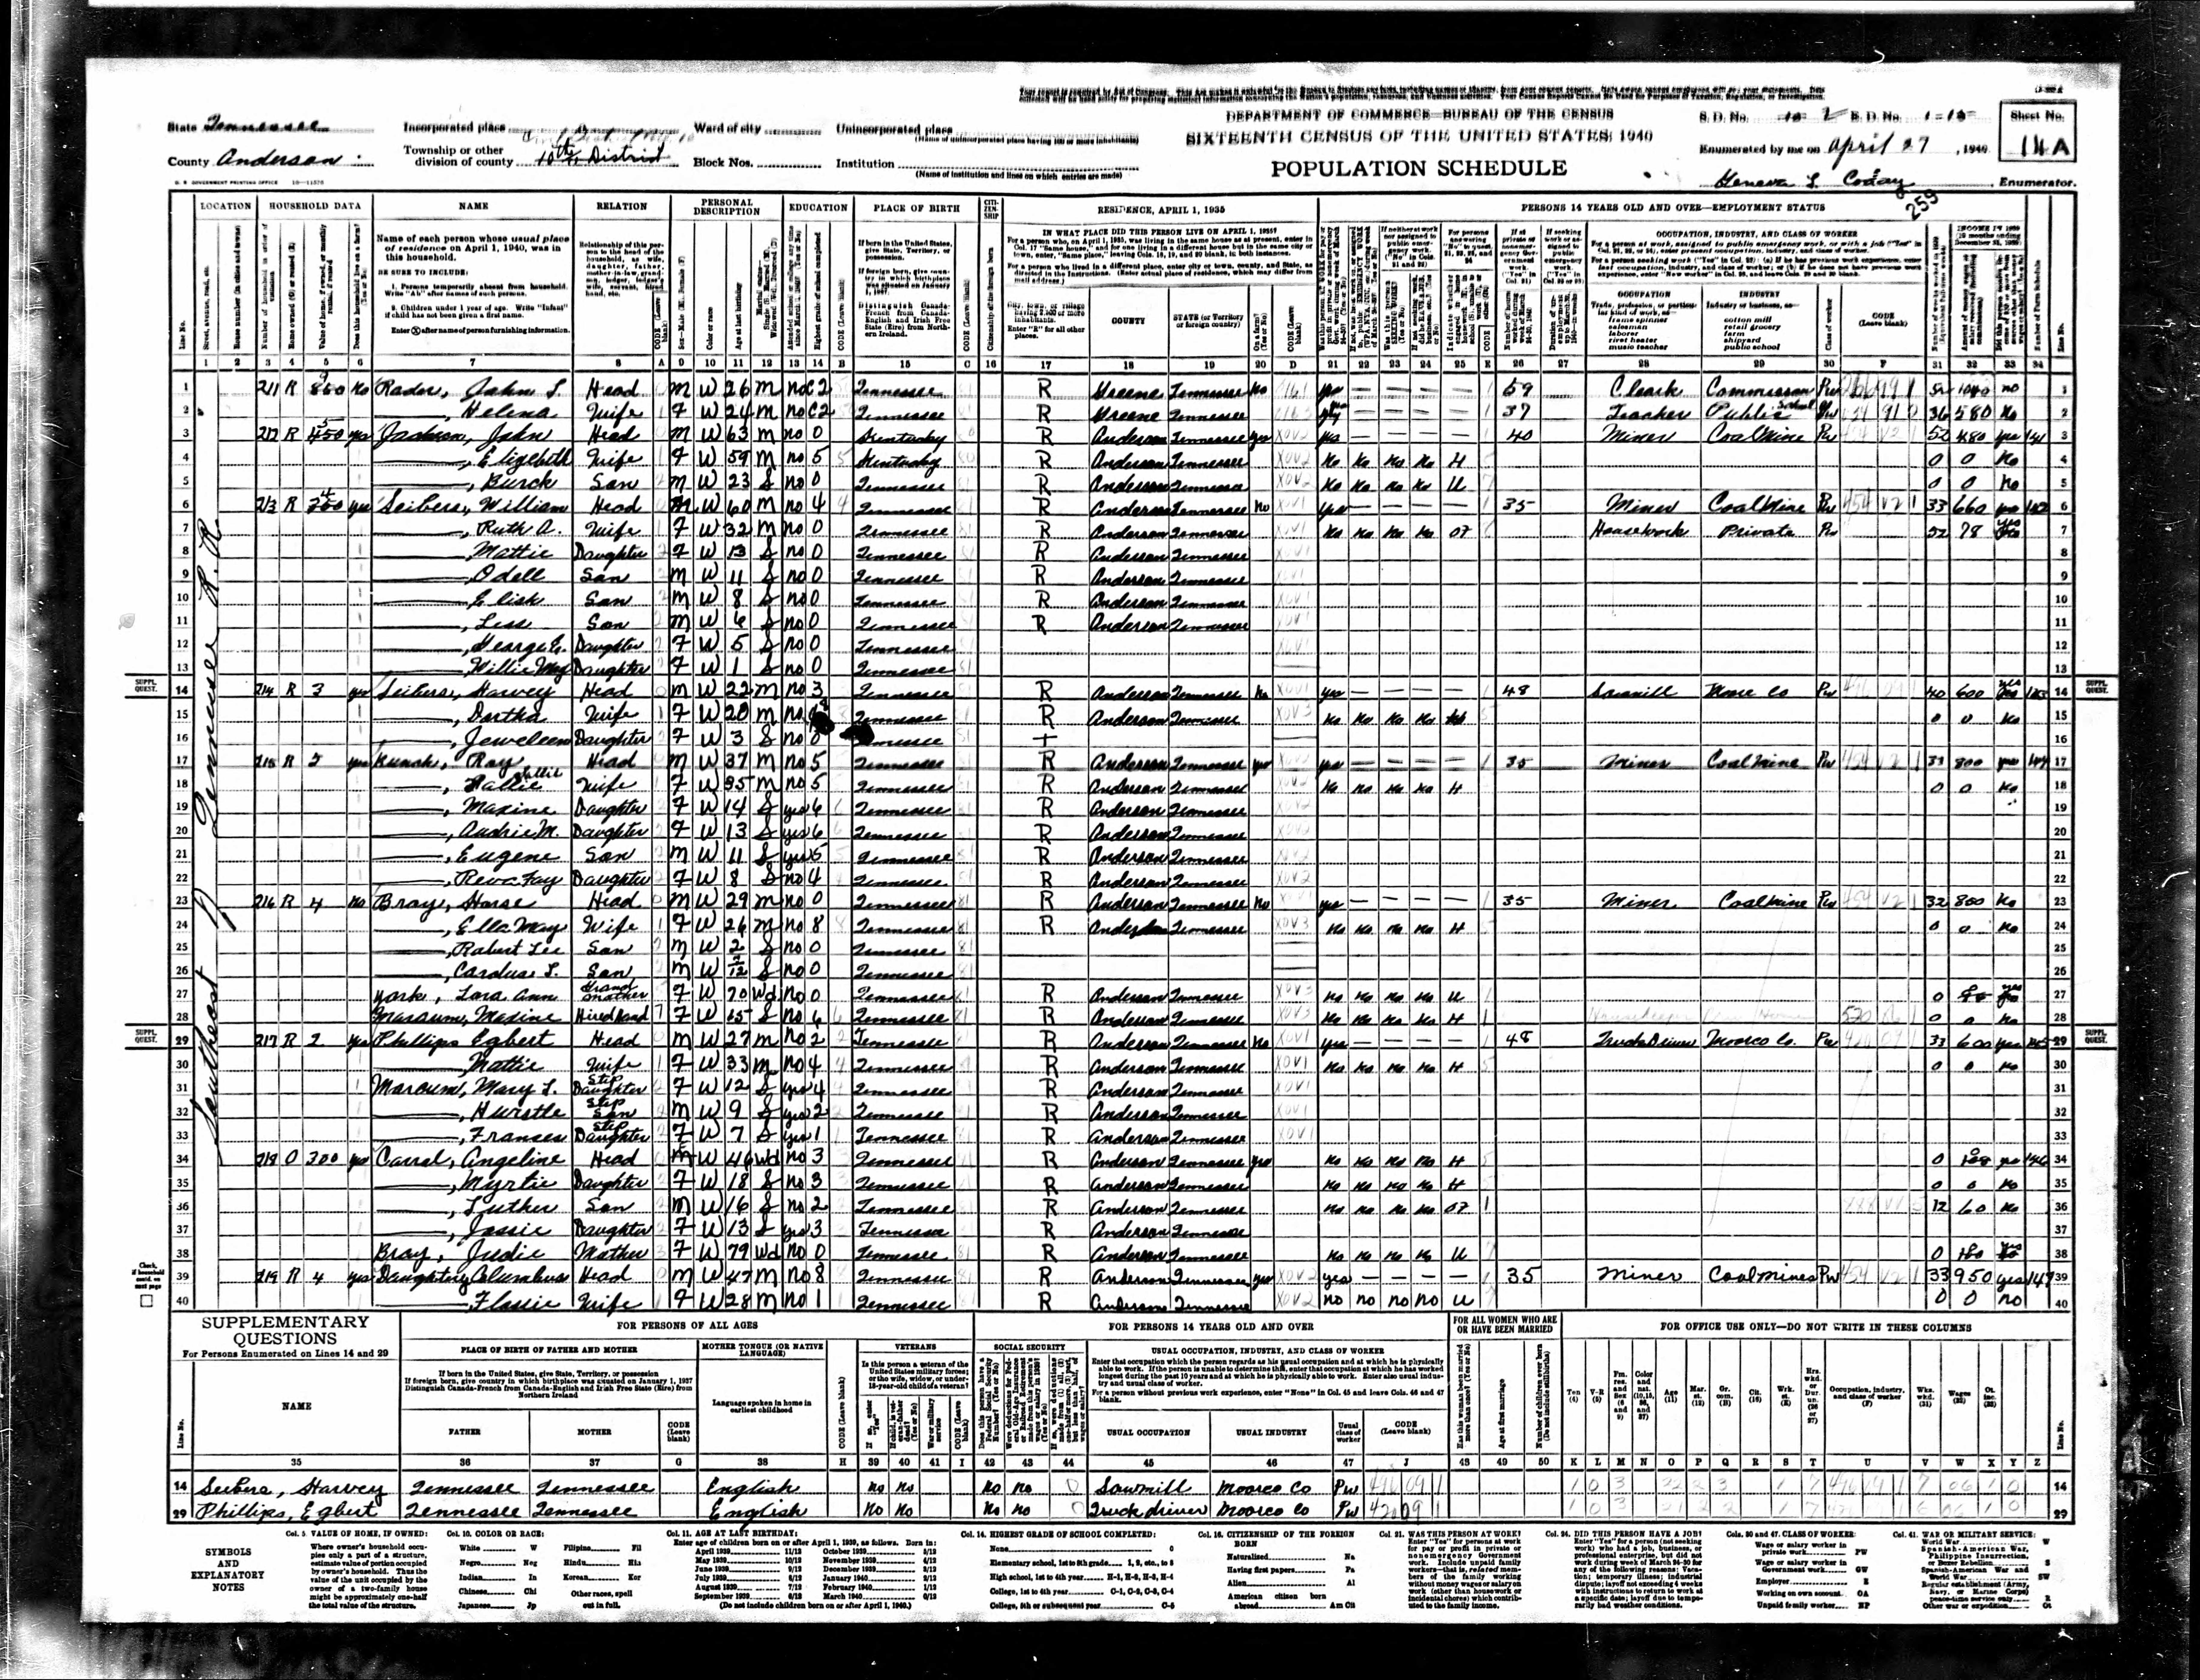 1940 U.S. Census, Anderson County, Tennessee, Dist. 10, page 259a